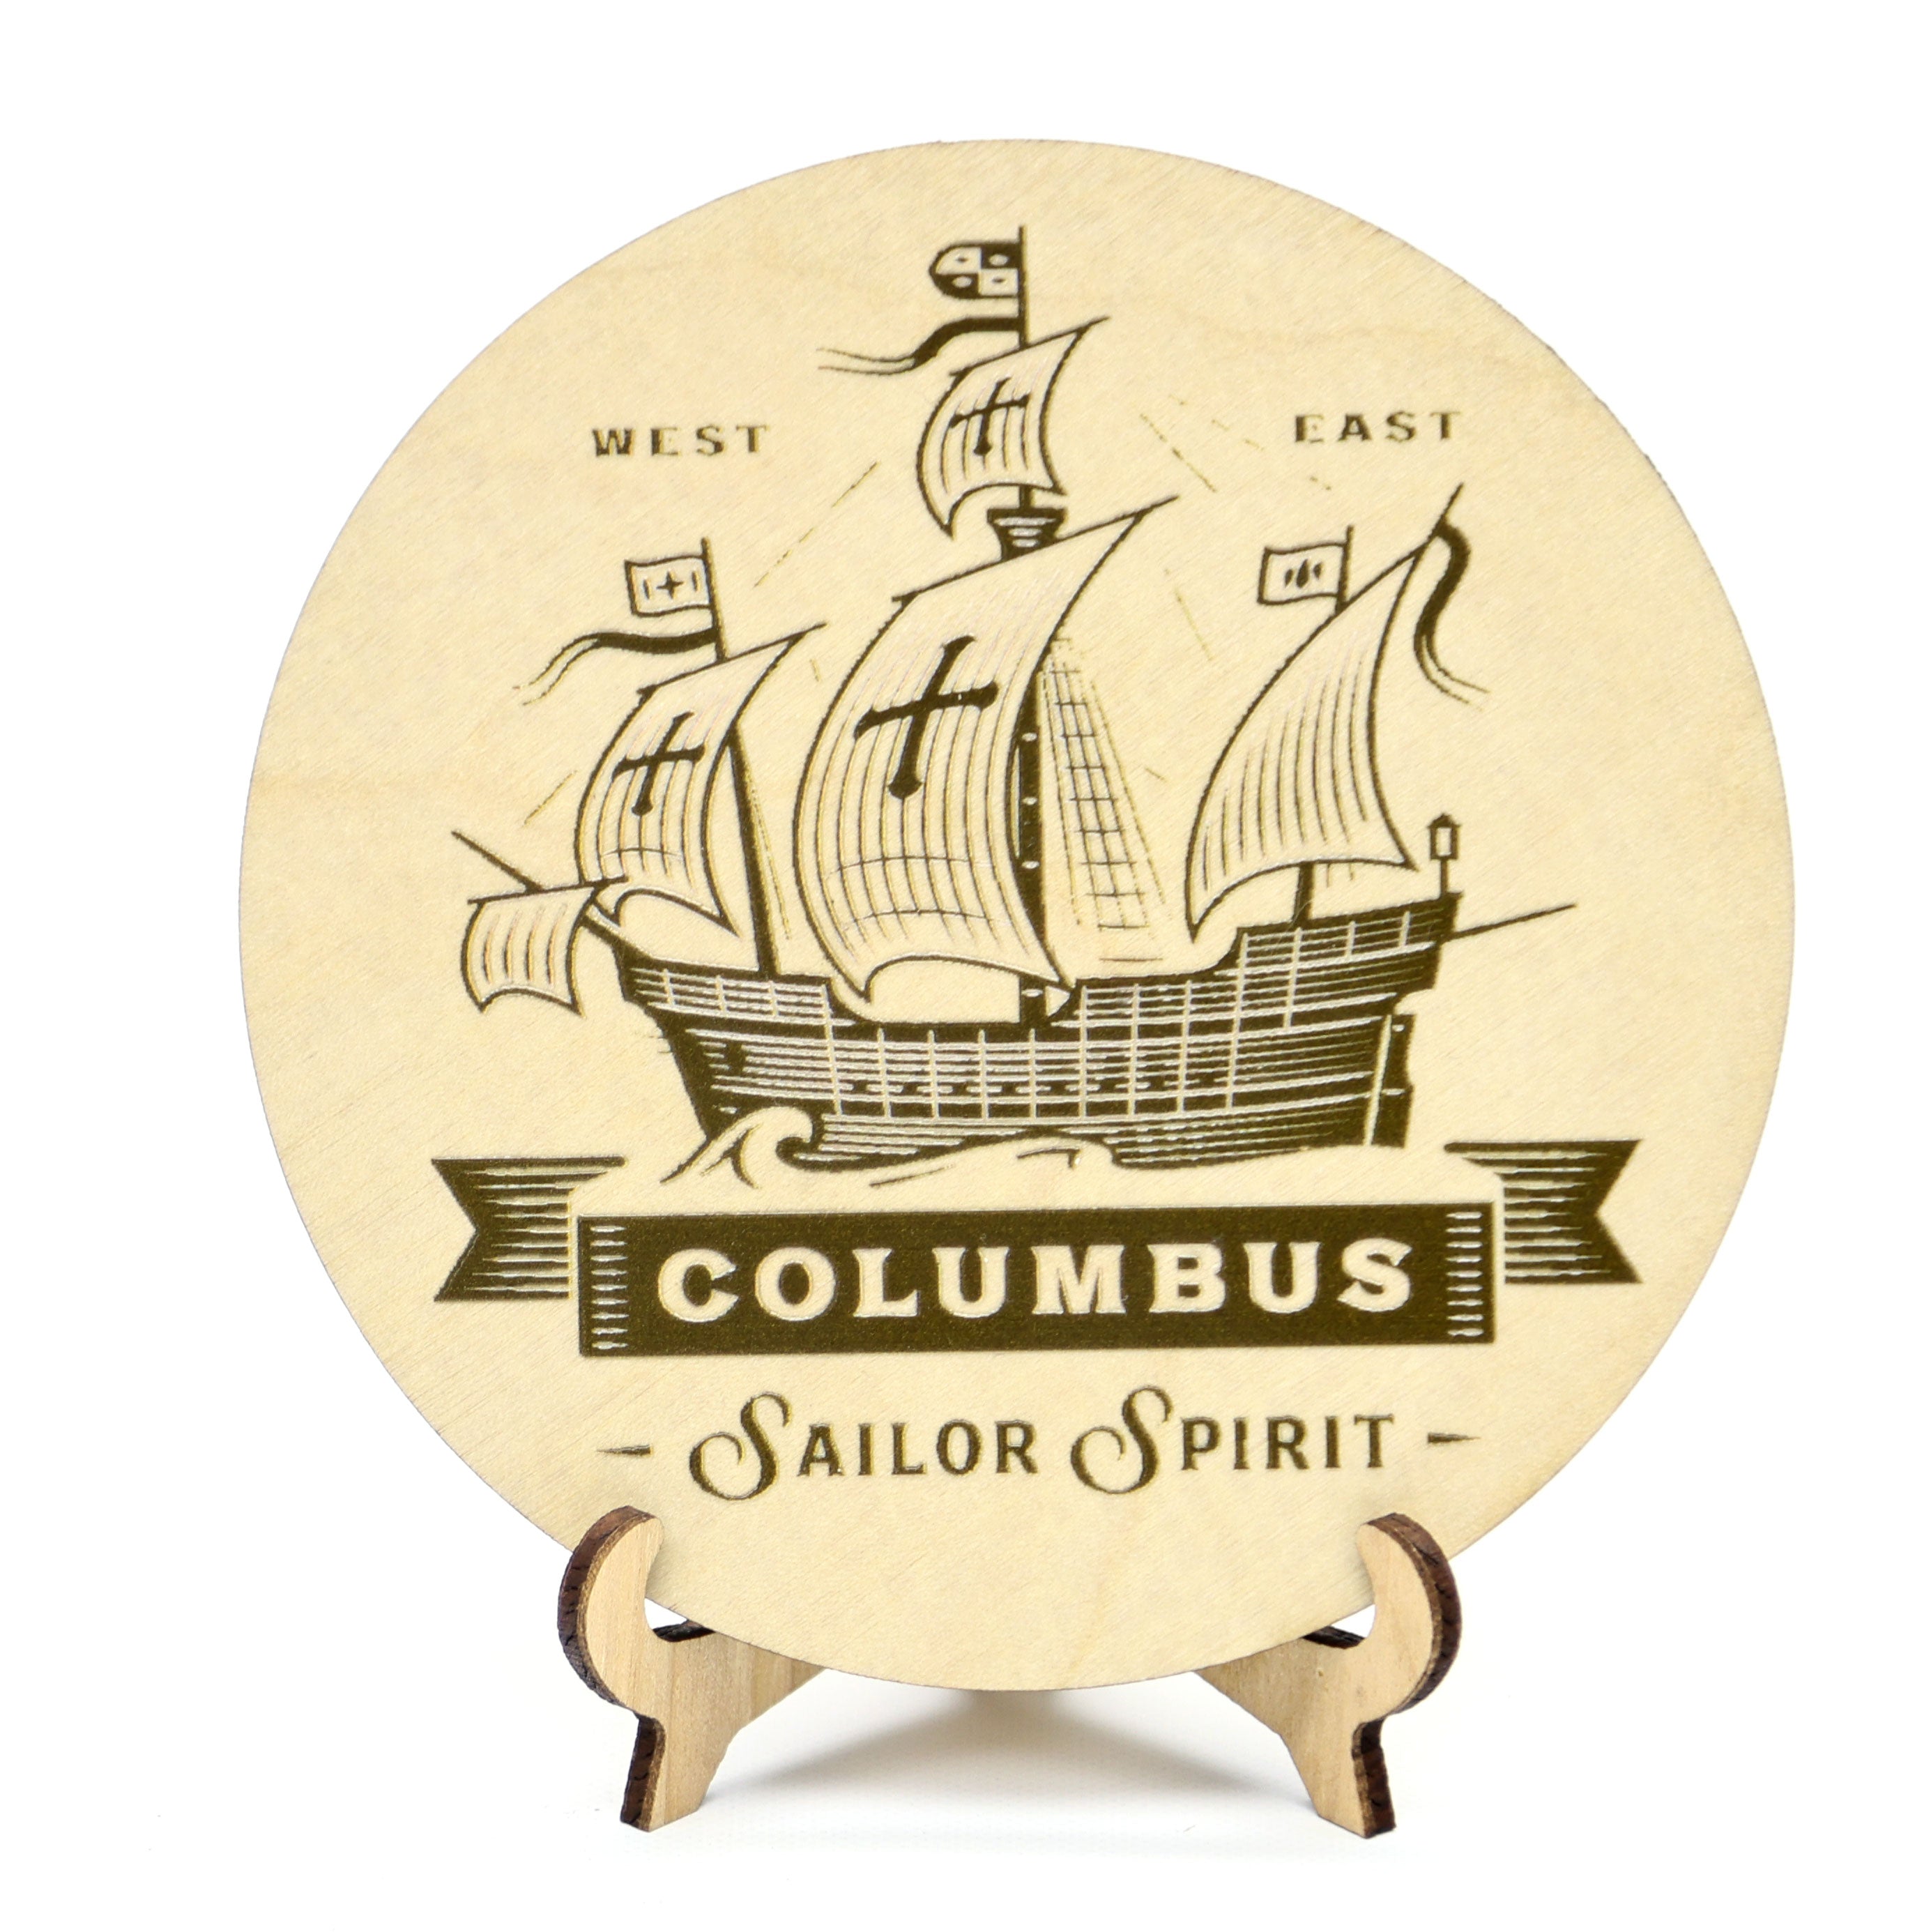 Wooden Coasters Set of 4 Pieces with a Nautical Designs - Black